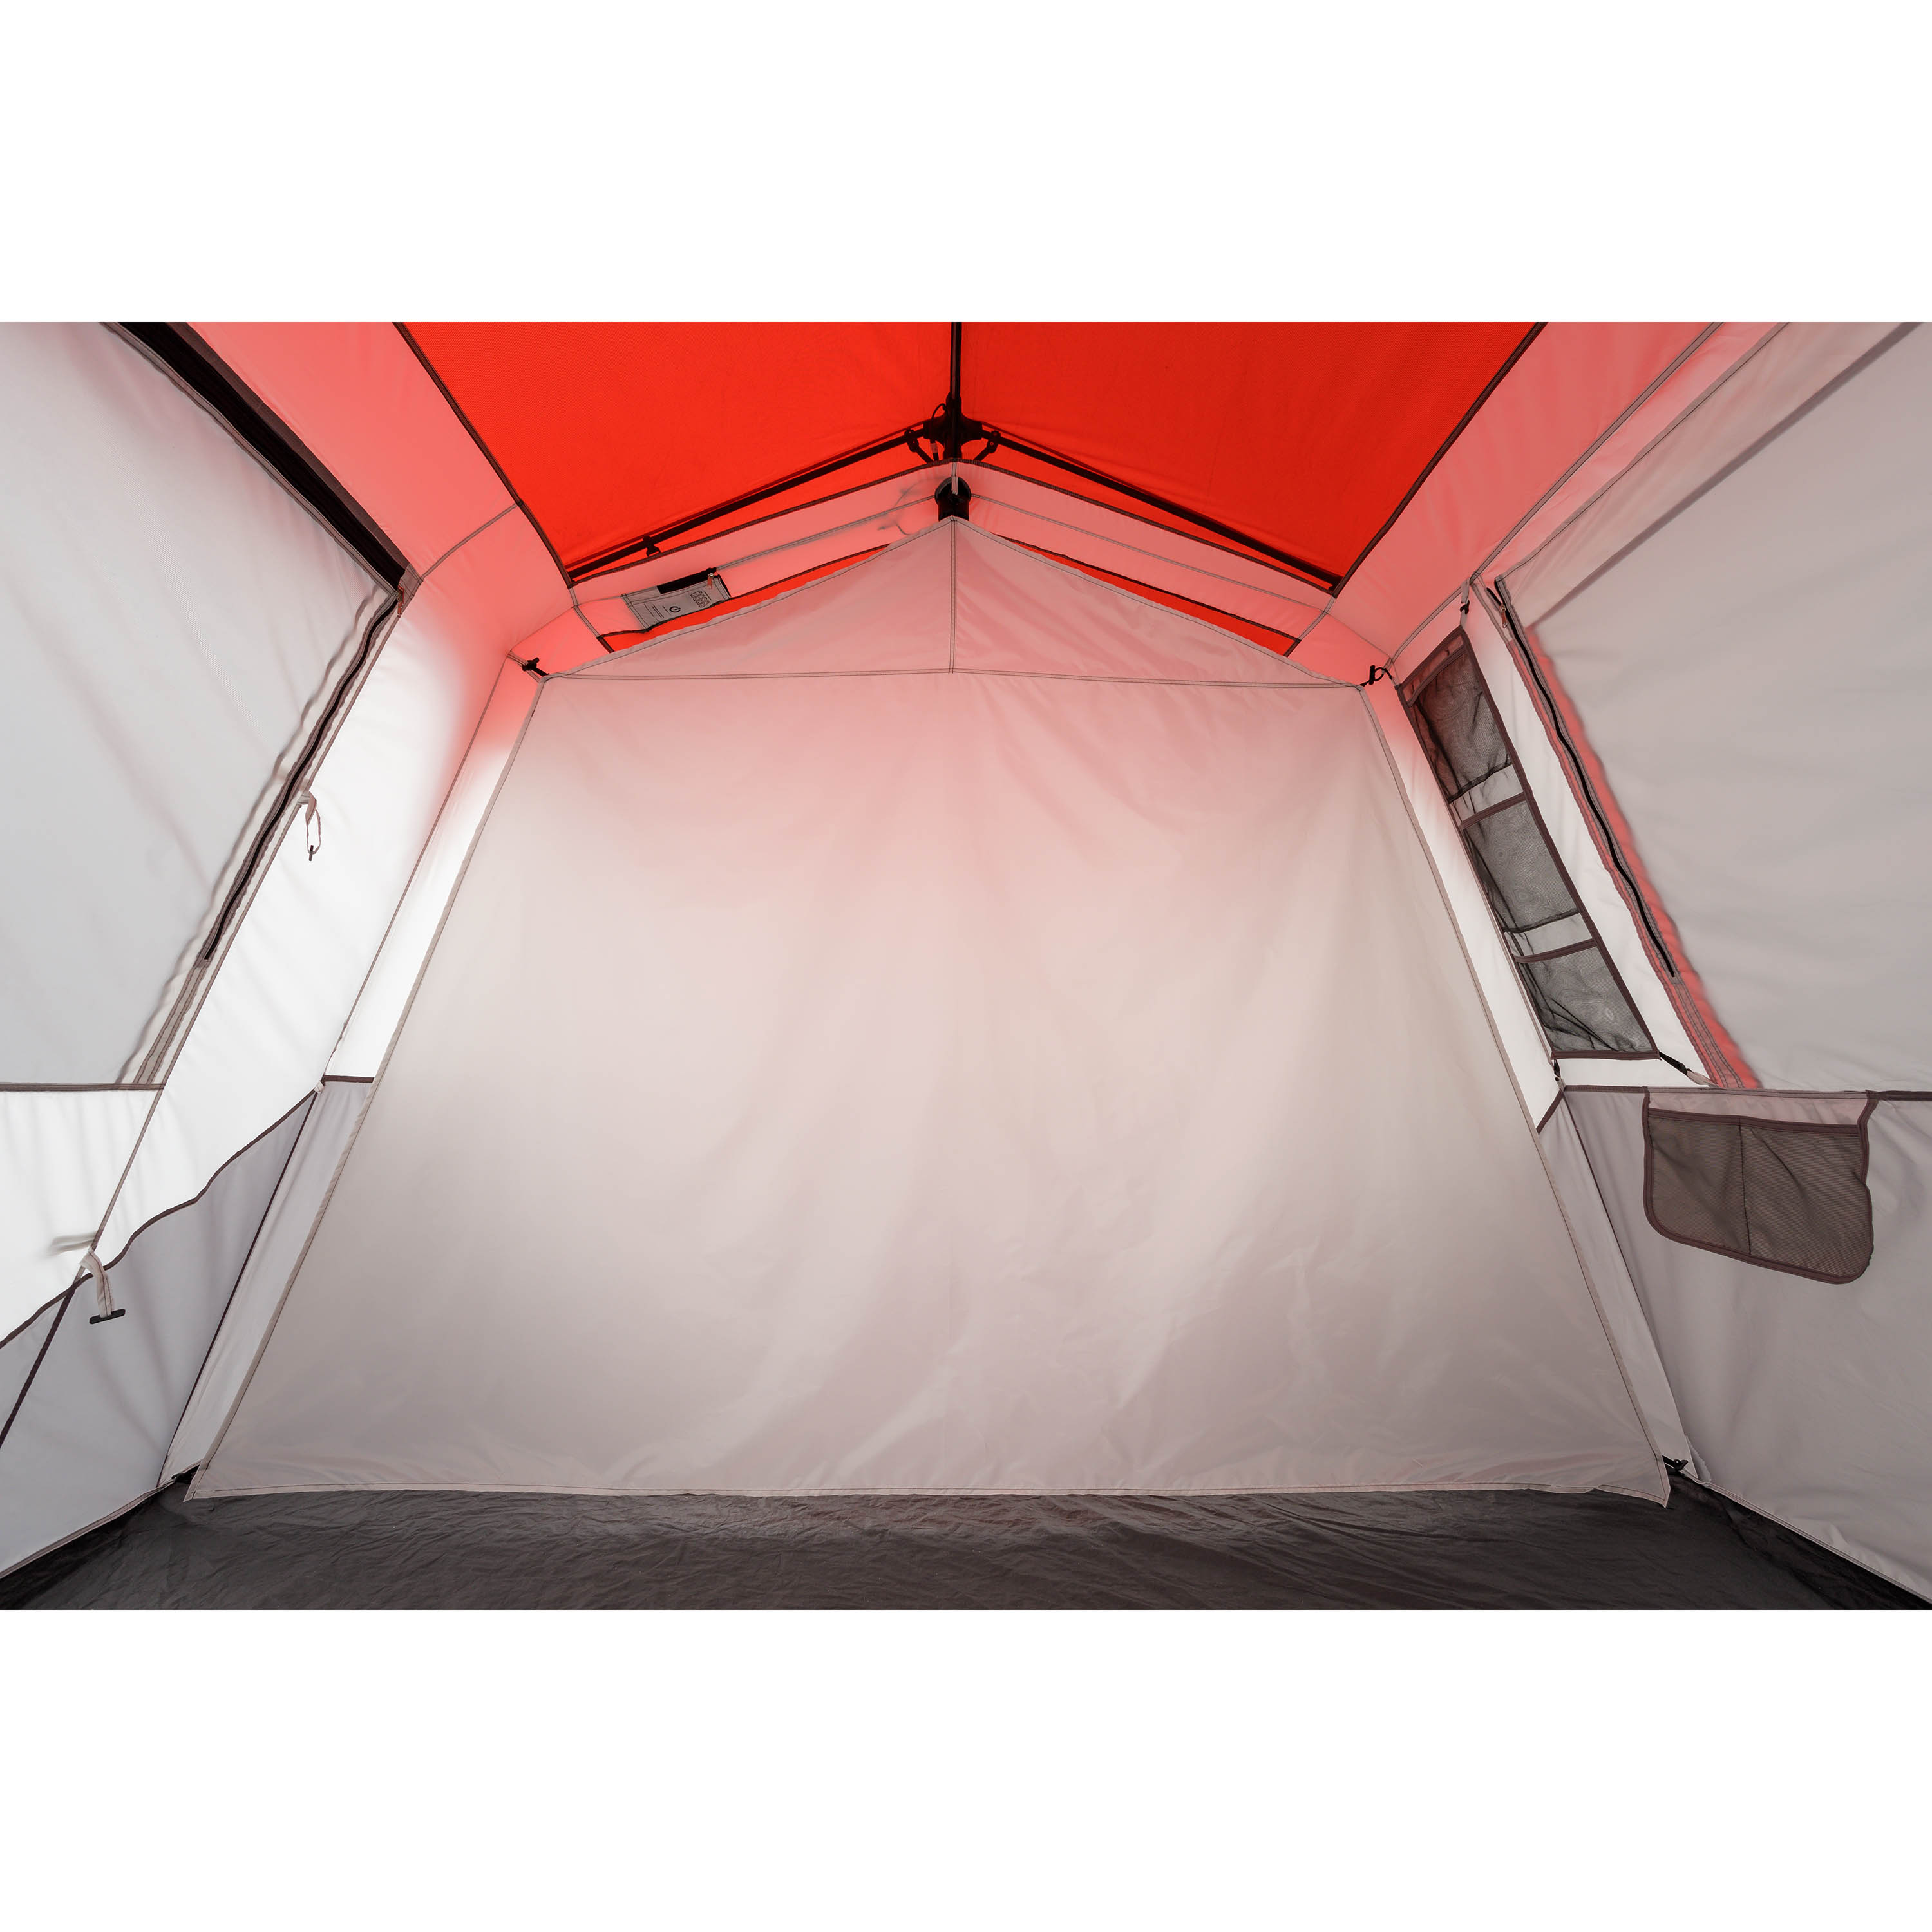 Ozark Trail 13' x 9' 8-Person Instant Cabin Tent with LED Lights, 36.9274 lbs - image 4 of 11